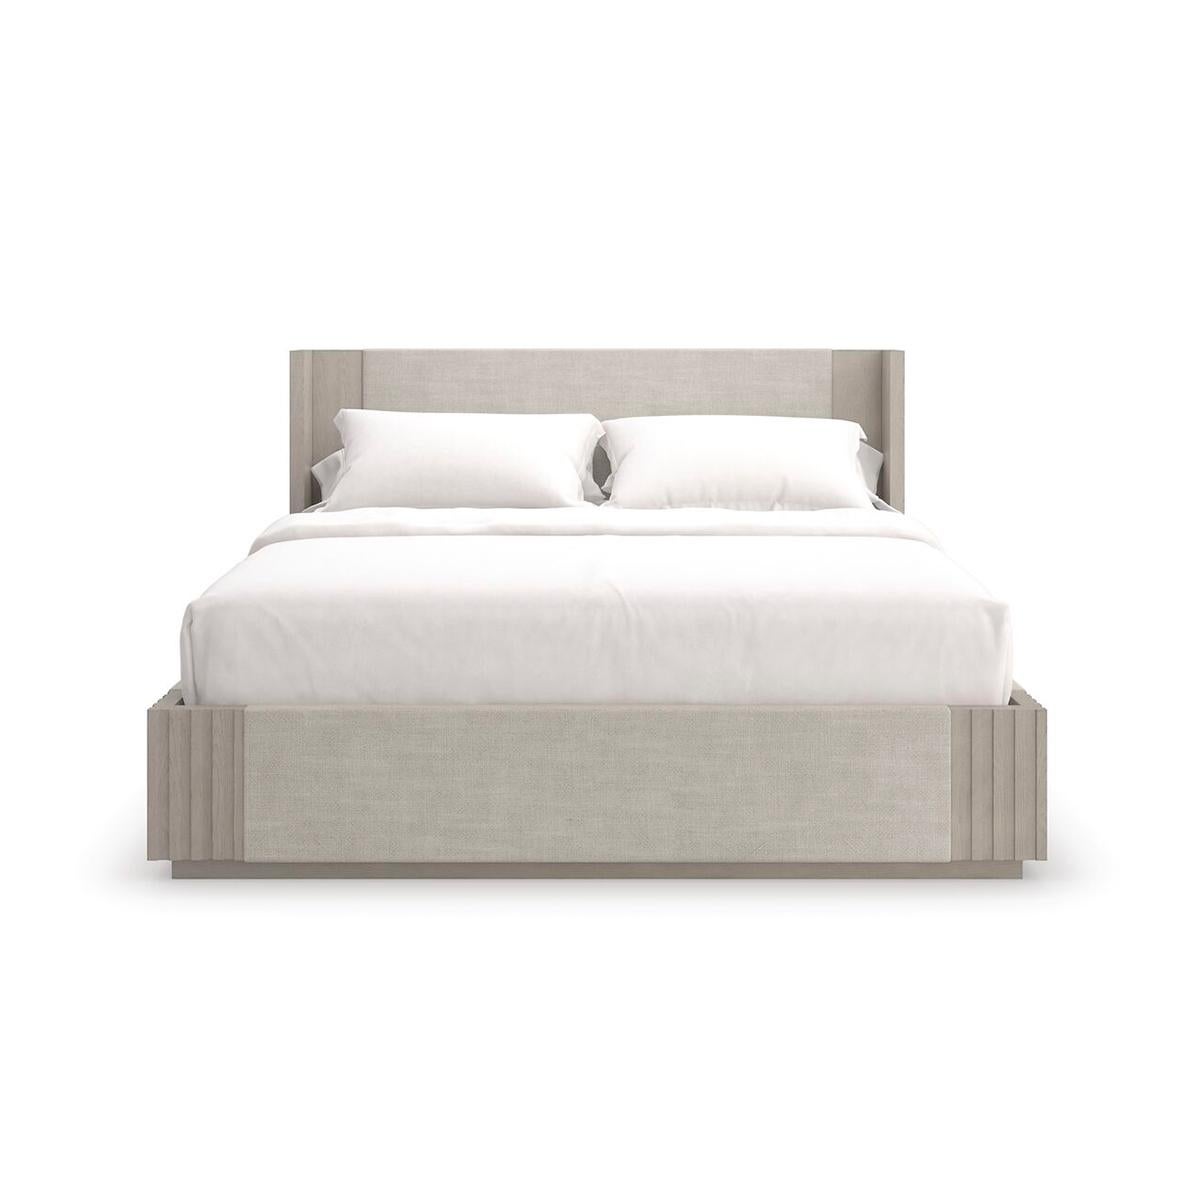 Inviting and impossibly elegant in a crisp linen fabric, the king bed sets a tranquil tone in a monochromatic palette. Elevated on a discreet platform base, its simple yet stylish frame features slatted corner details, meticulously crafted in oak